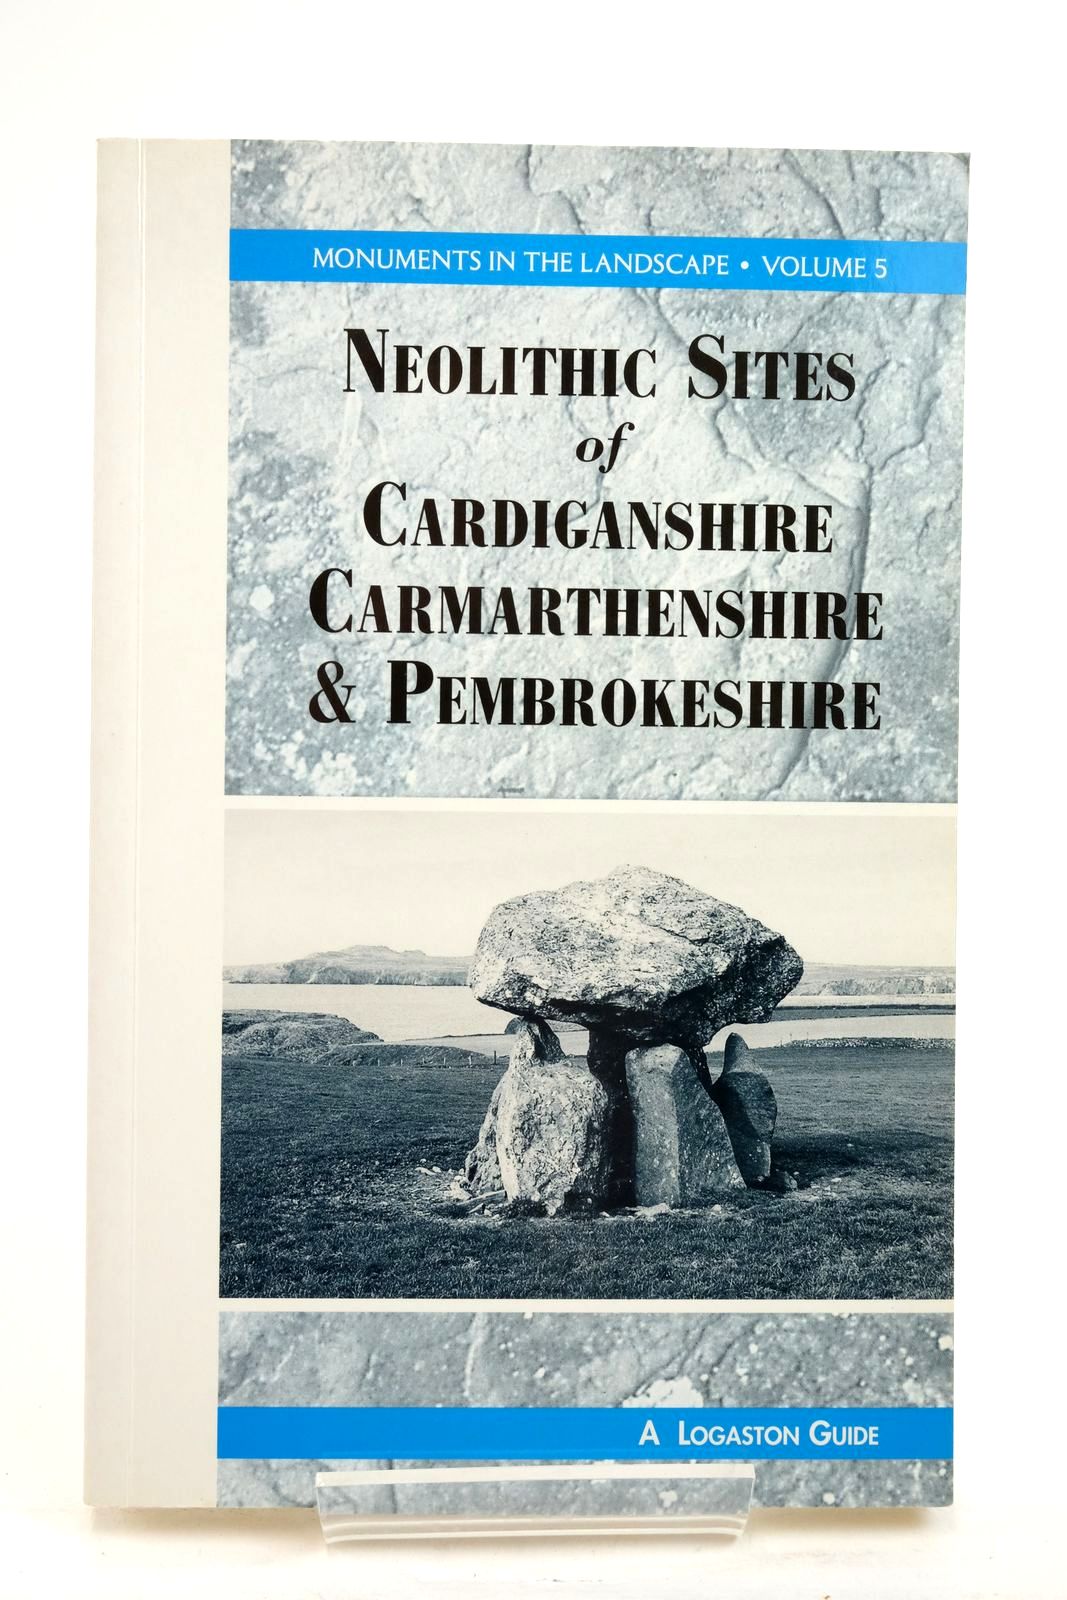 Photo of THE ANTHROPOLOGY OF LANDSCAPE: A GUIDE TO THE NEOLITHIC SITES IN CARDIGANSHIRE, CARMARTHENSHIRE &amp; PEMBROKESHIRE written by Children, George Nash, George published by Logaston Press (STOCK CODE: 2137102)  for sale by Stella & Rose's Books